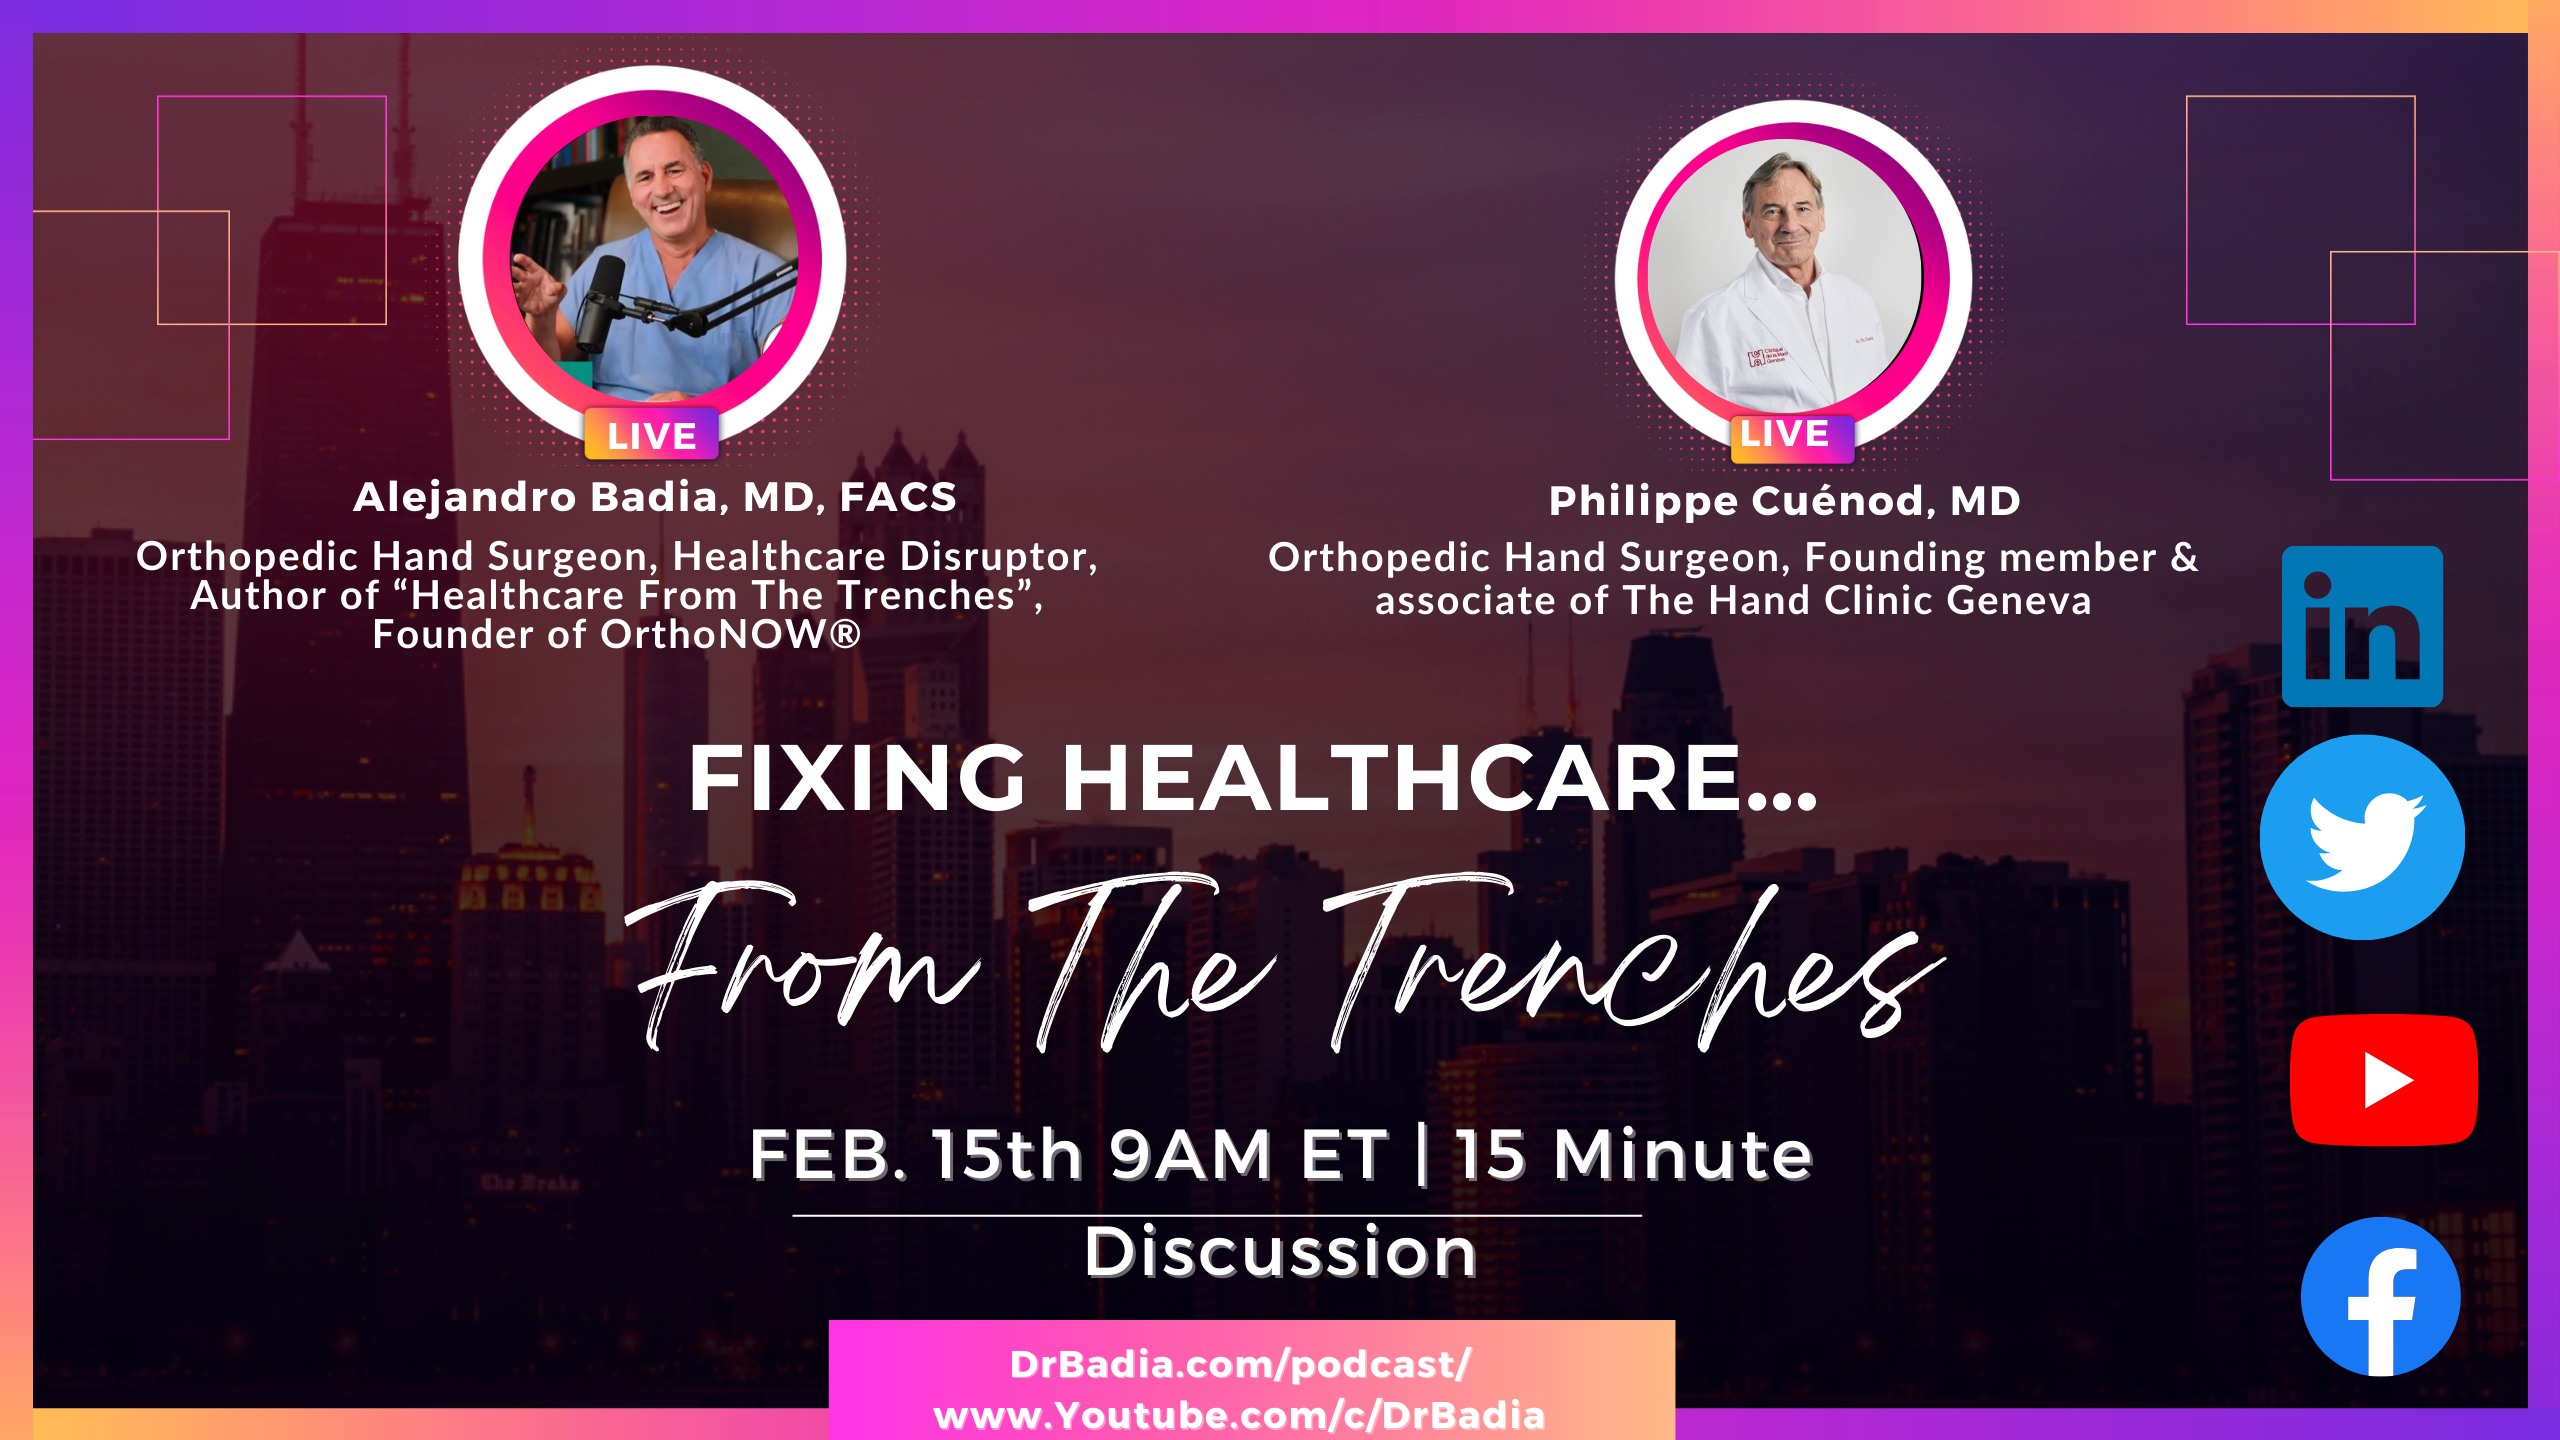 E28 Dr. Cuénod on Fixing Healthcare...From The Trenches with Dr. Badia